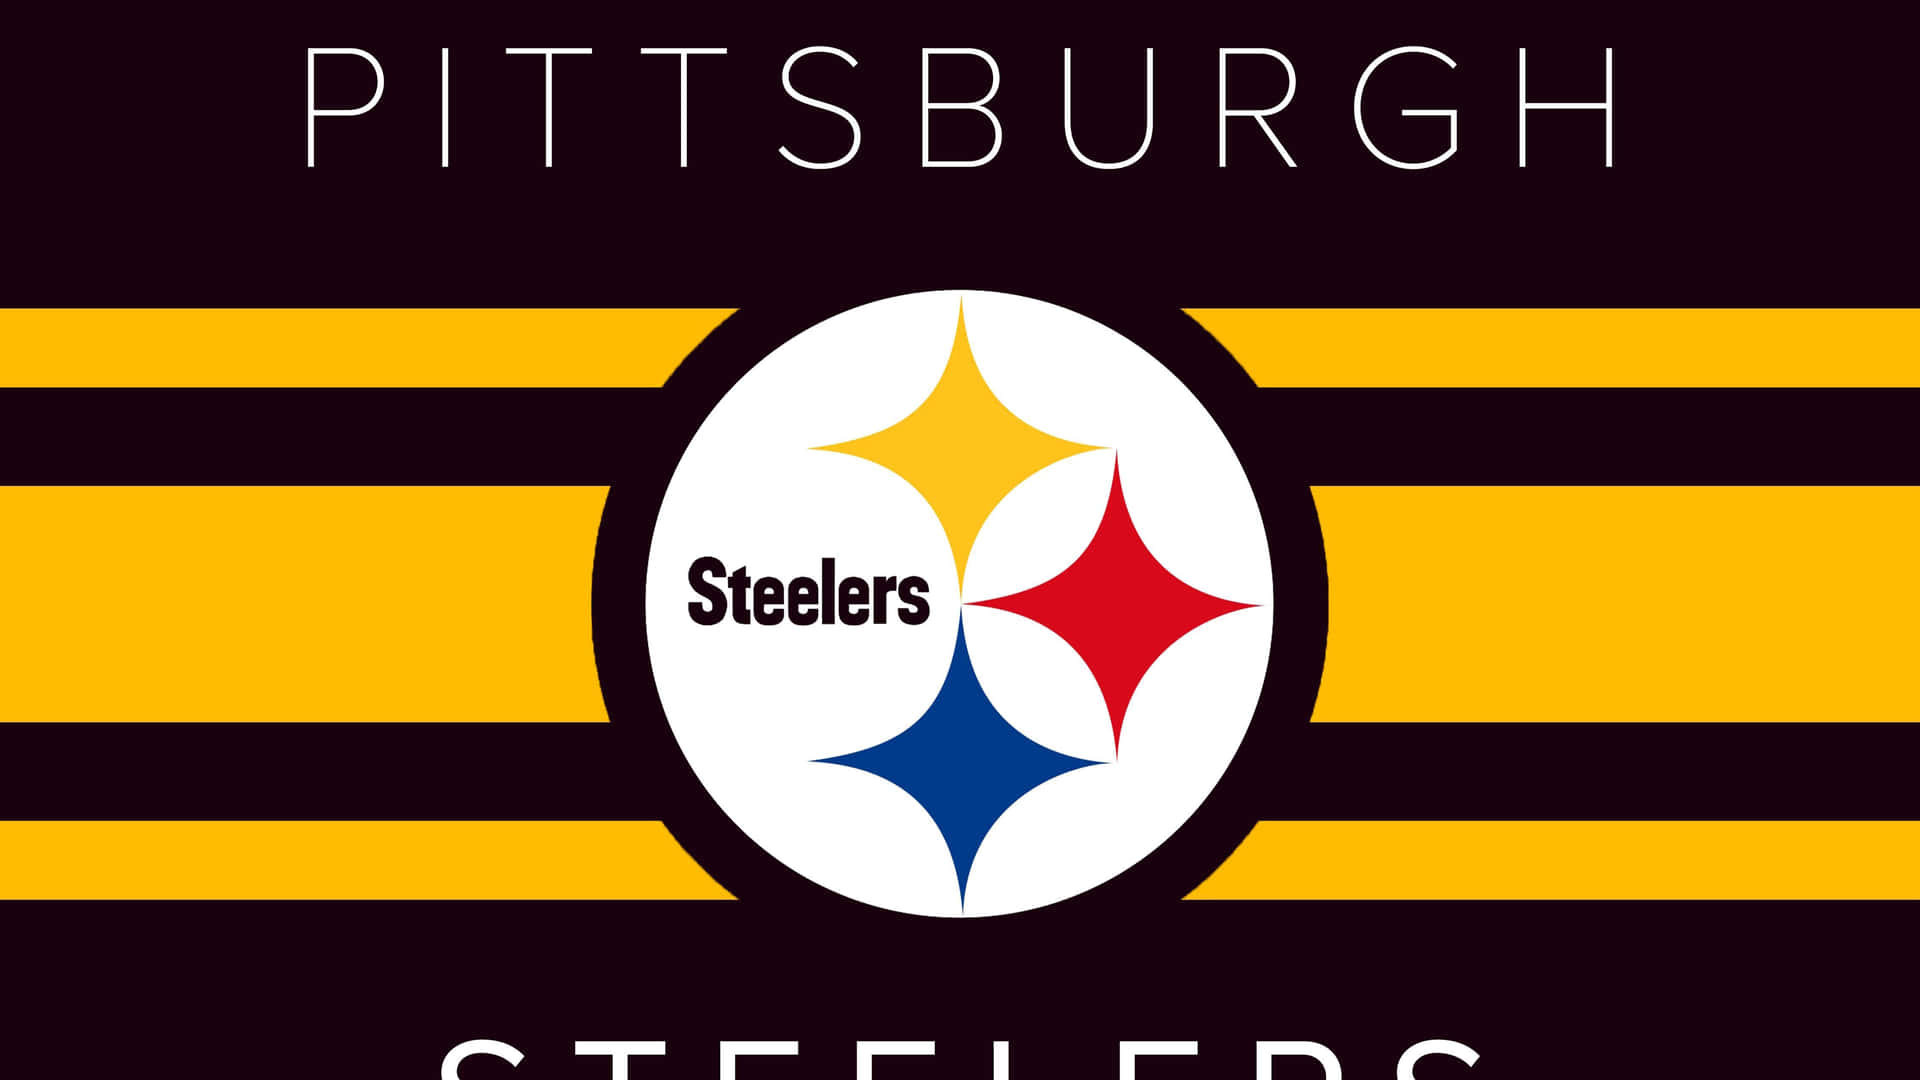 "Show your Steelers pride with an iPhone!" Wallpaper